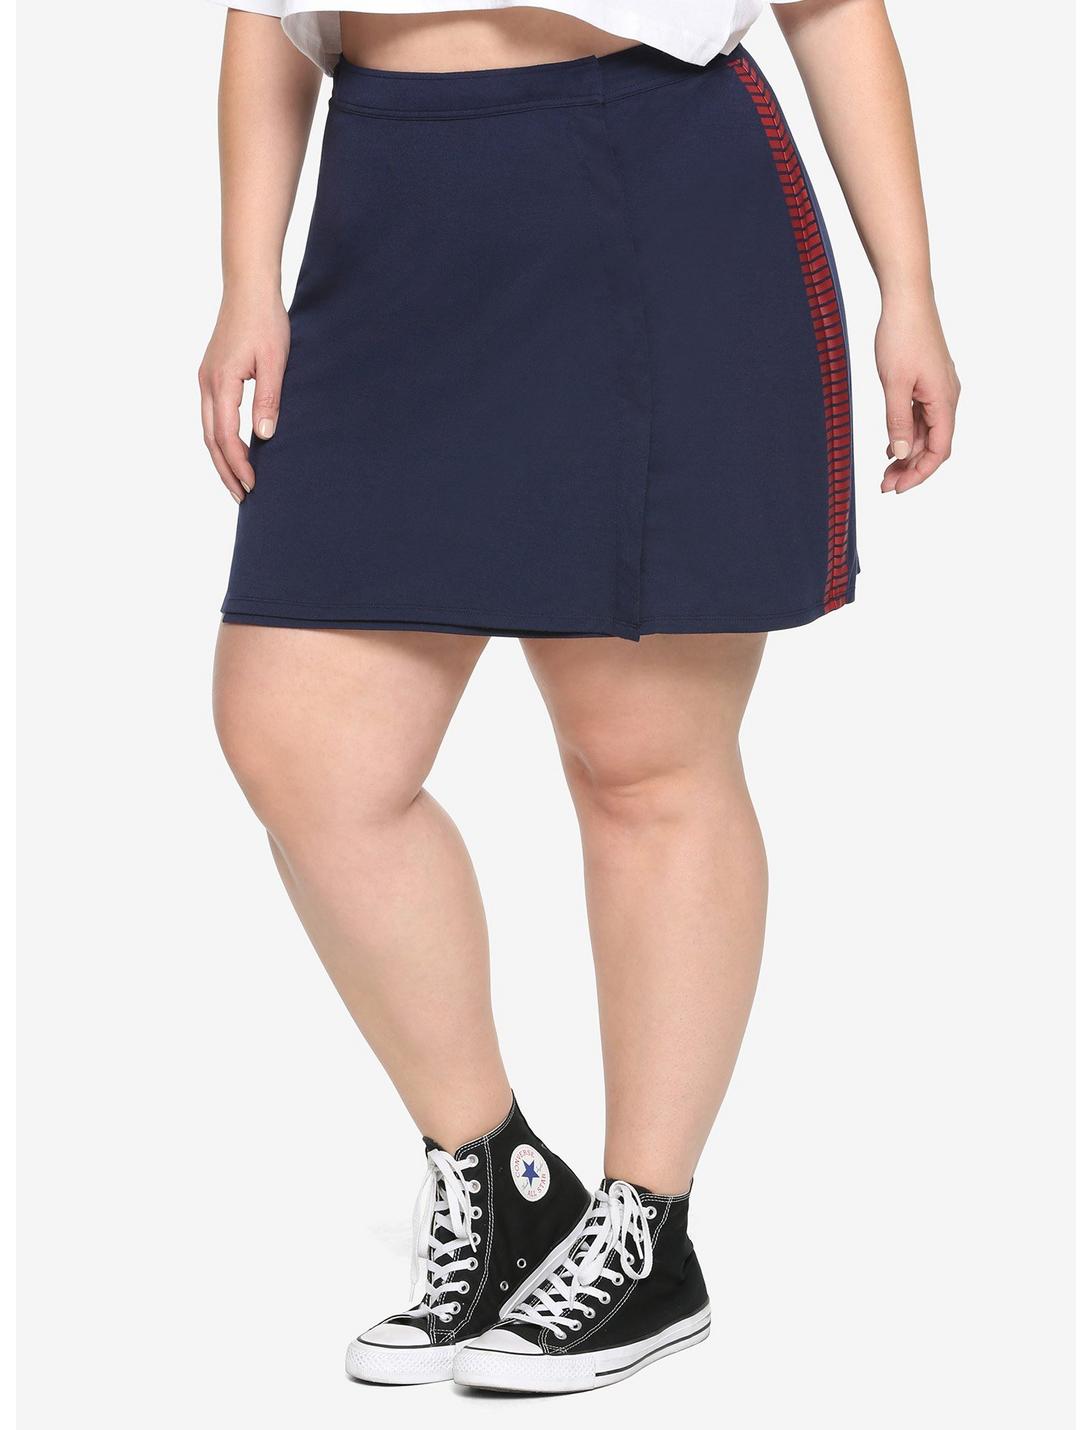 Her Universe Star Wars Solo Wrap Skirt Plus Size, MULTI, hi-res